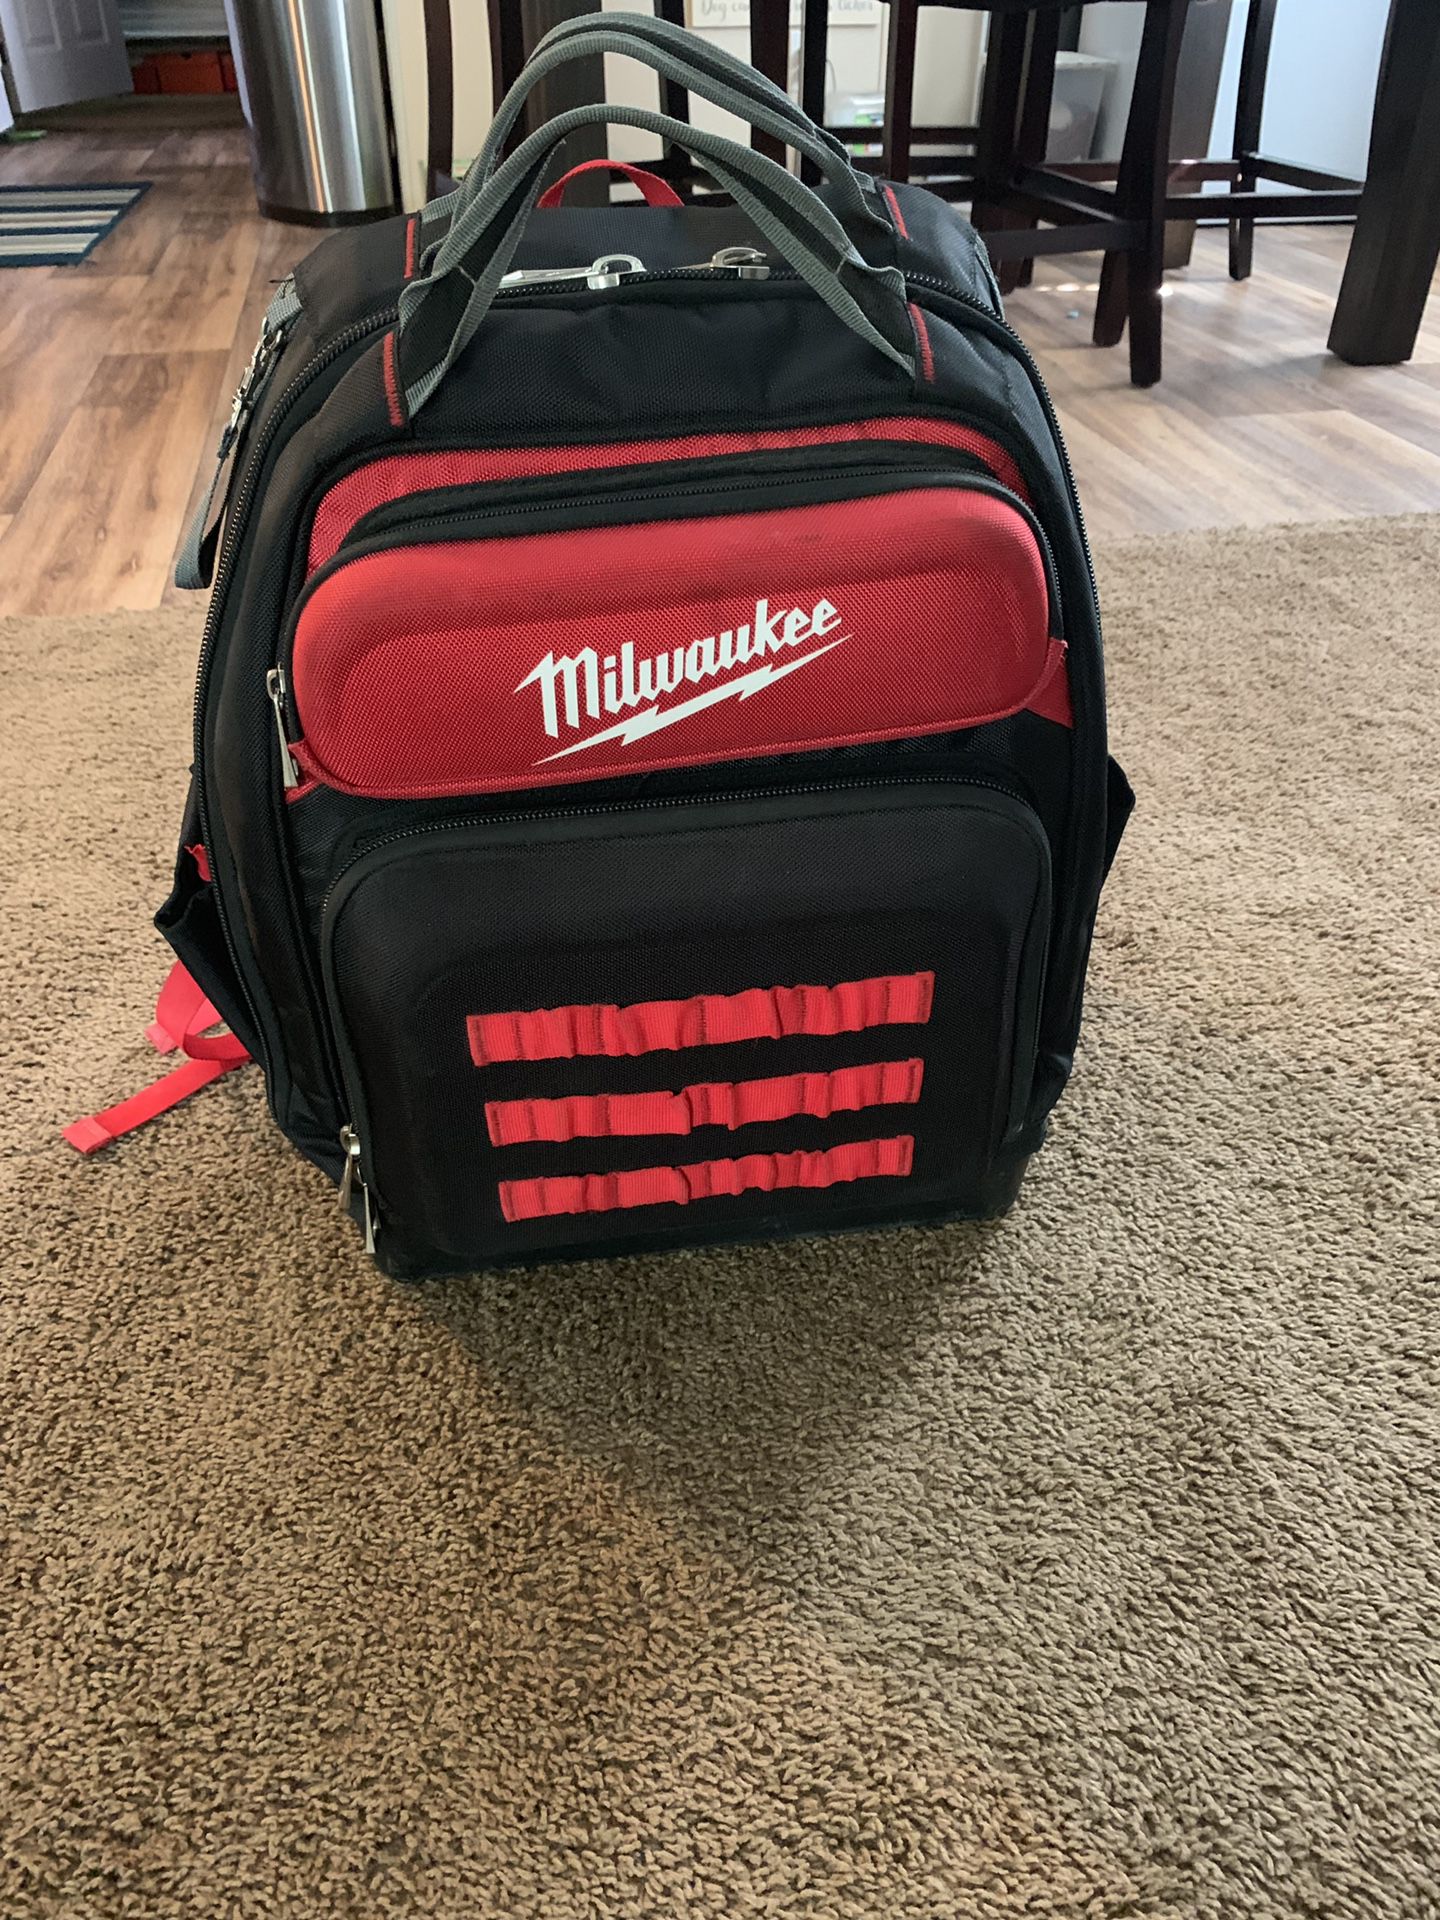 Milwaukee backpack and packout tote